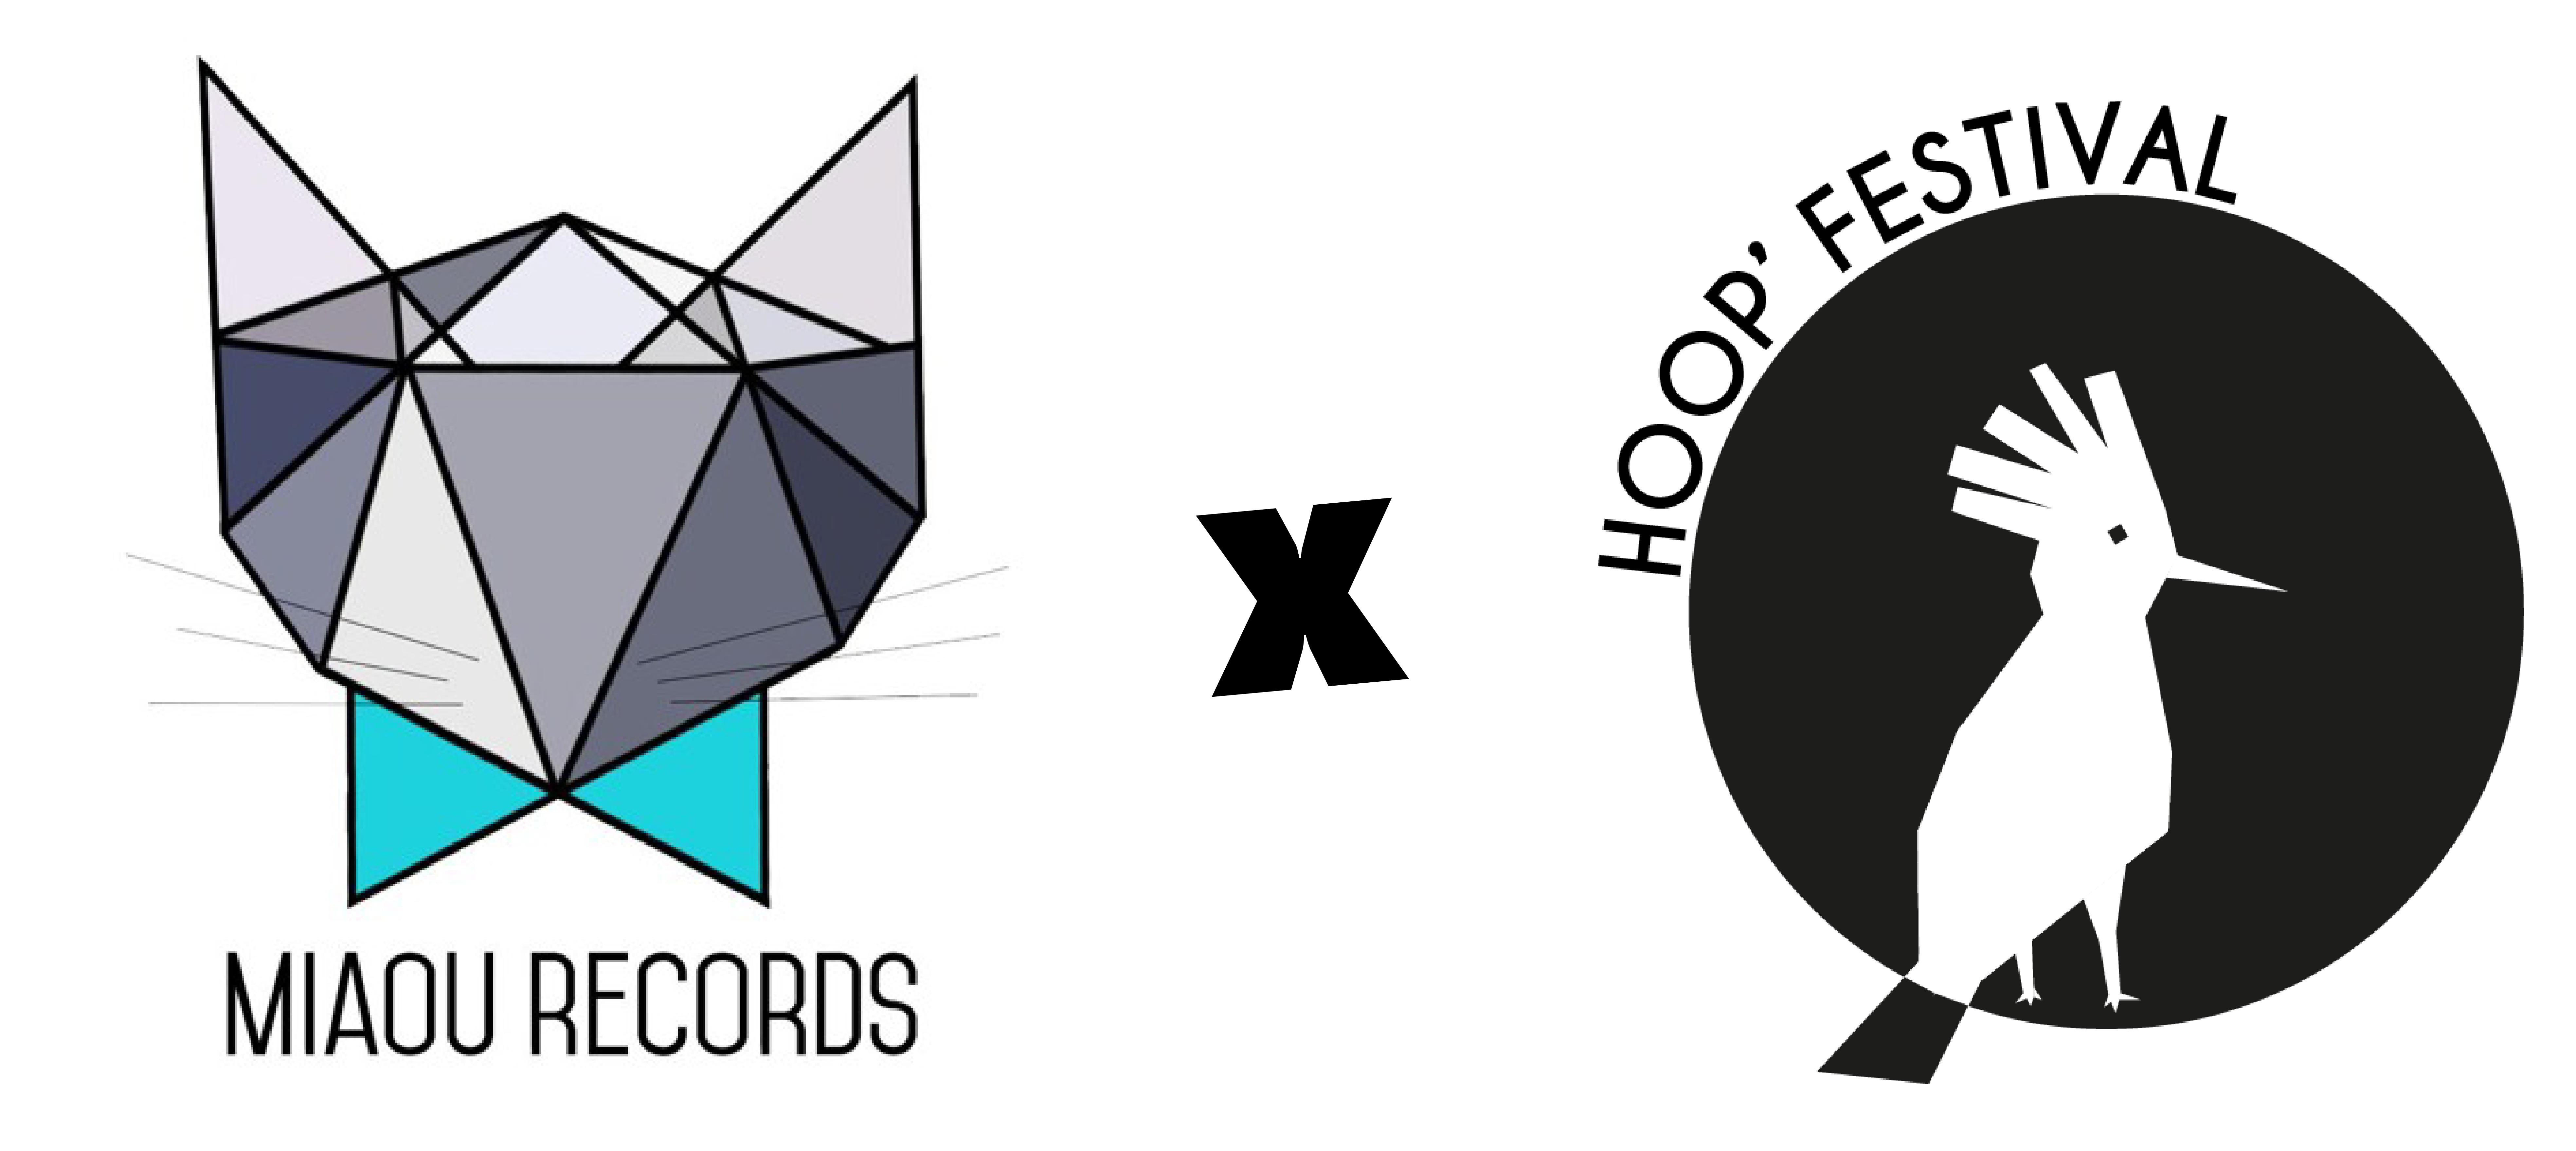 [COLLAB] MIAOU RECORDS x HOOP’ FESTIVAL = MIAHOOP’